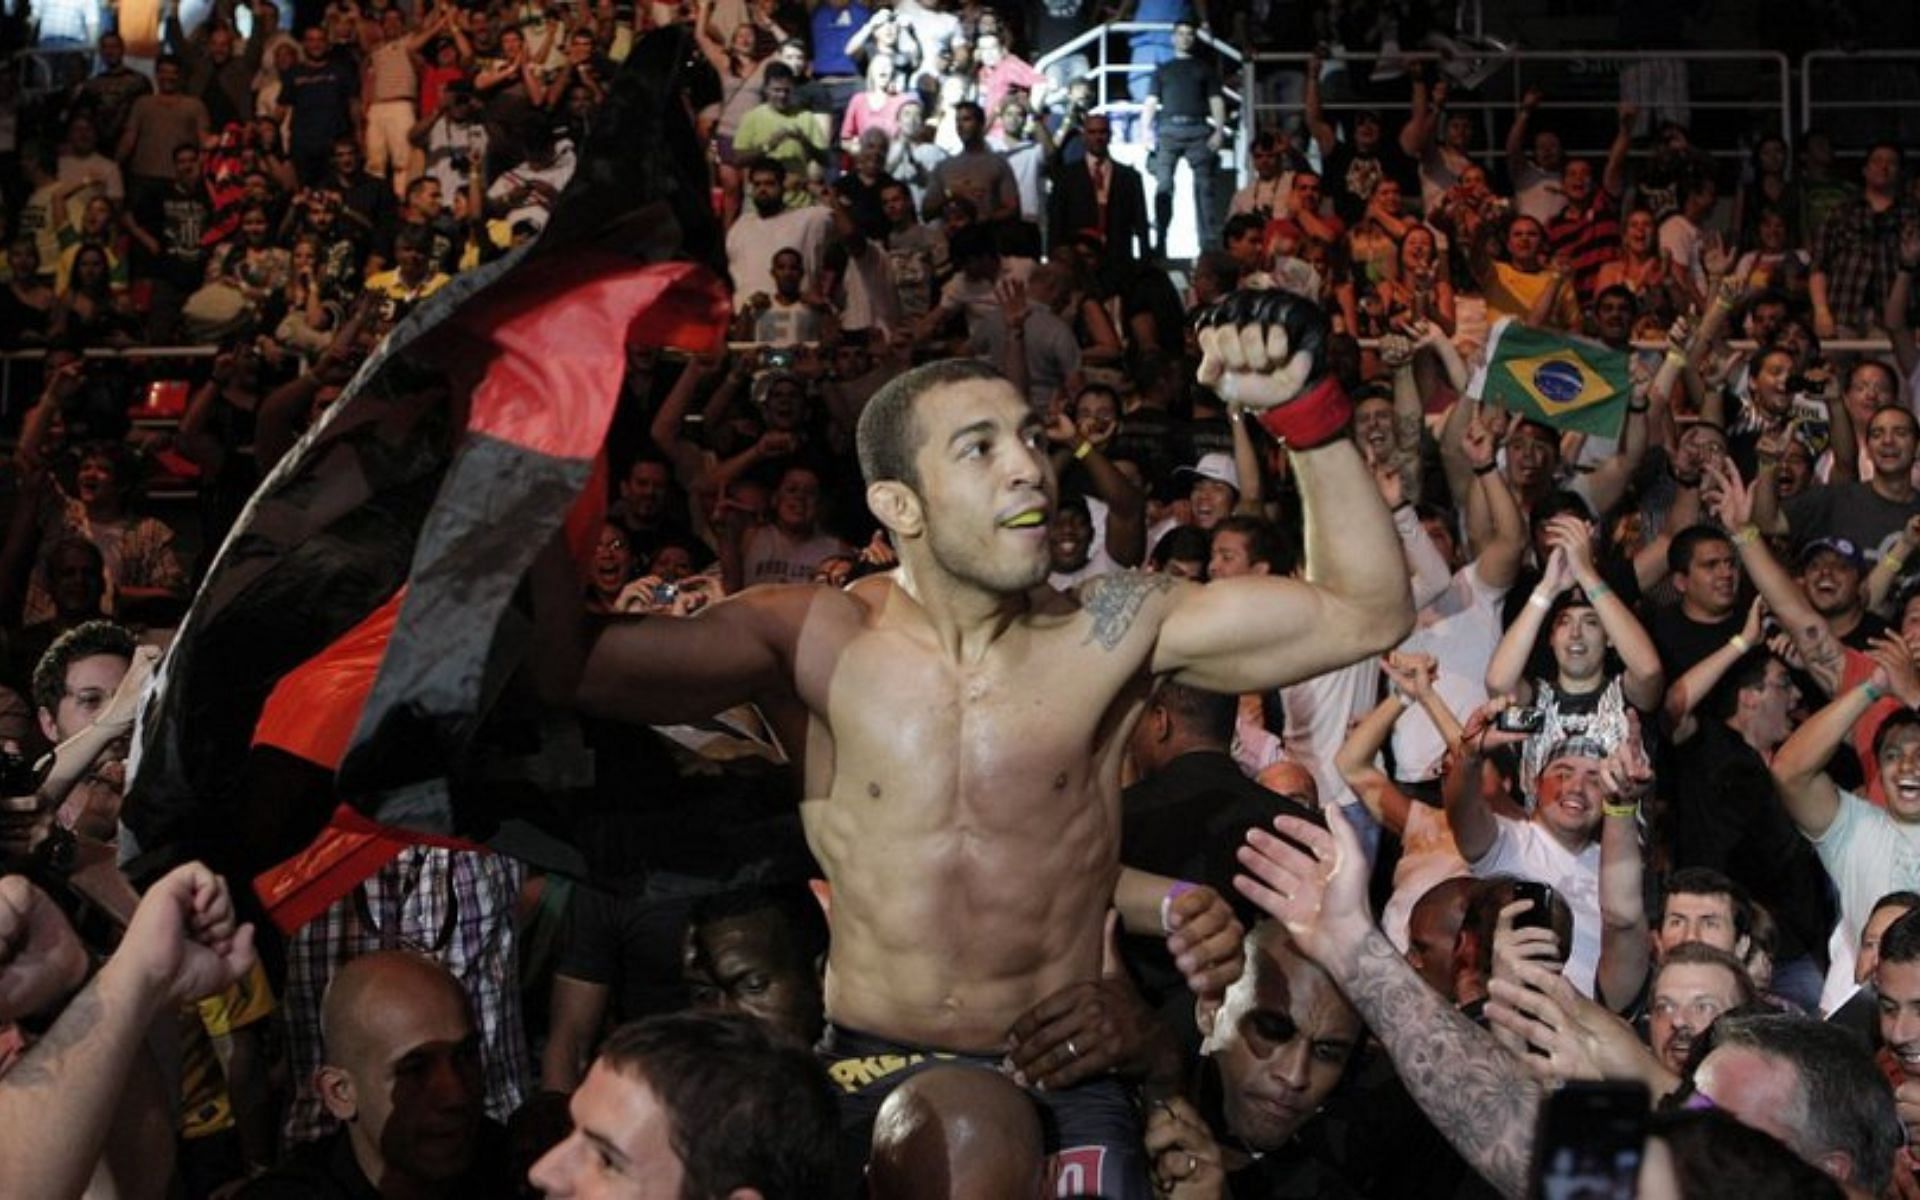 Jose Aldo in the crowd at UFC 142 [image courtesy of @Skip2MyJays/Twitter]